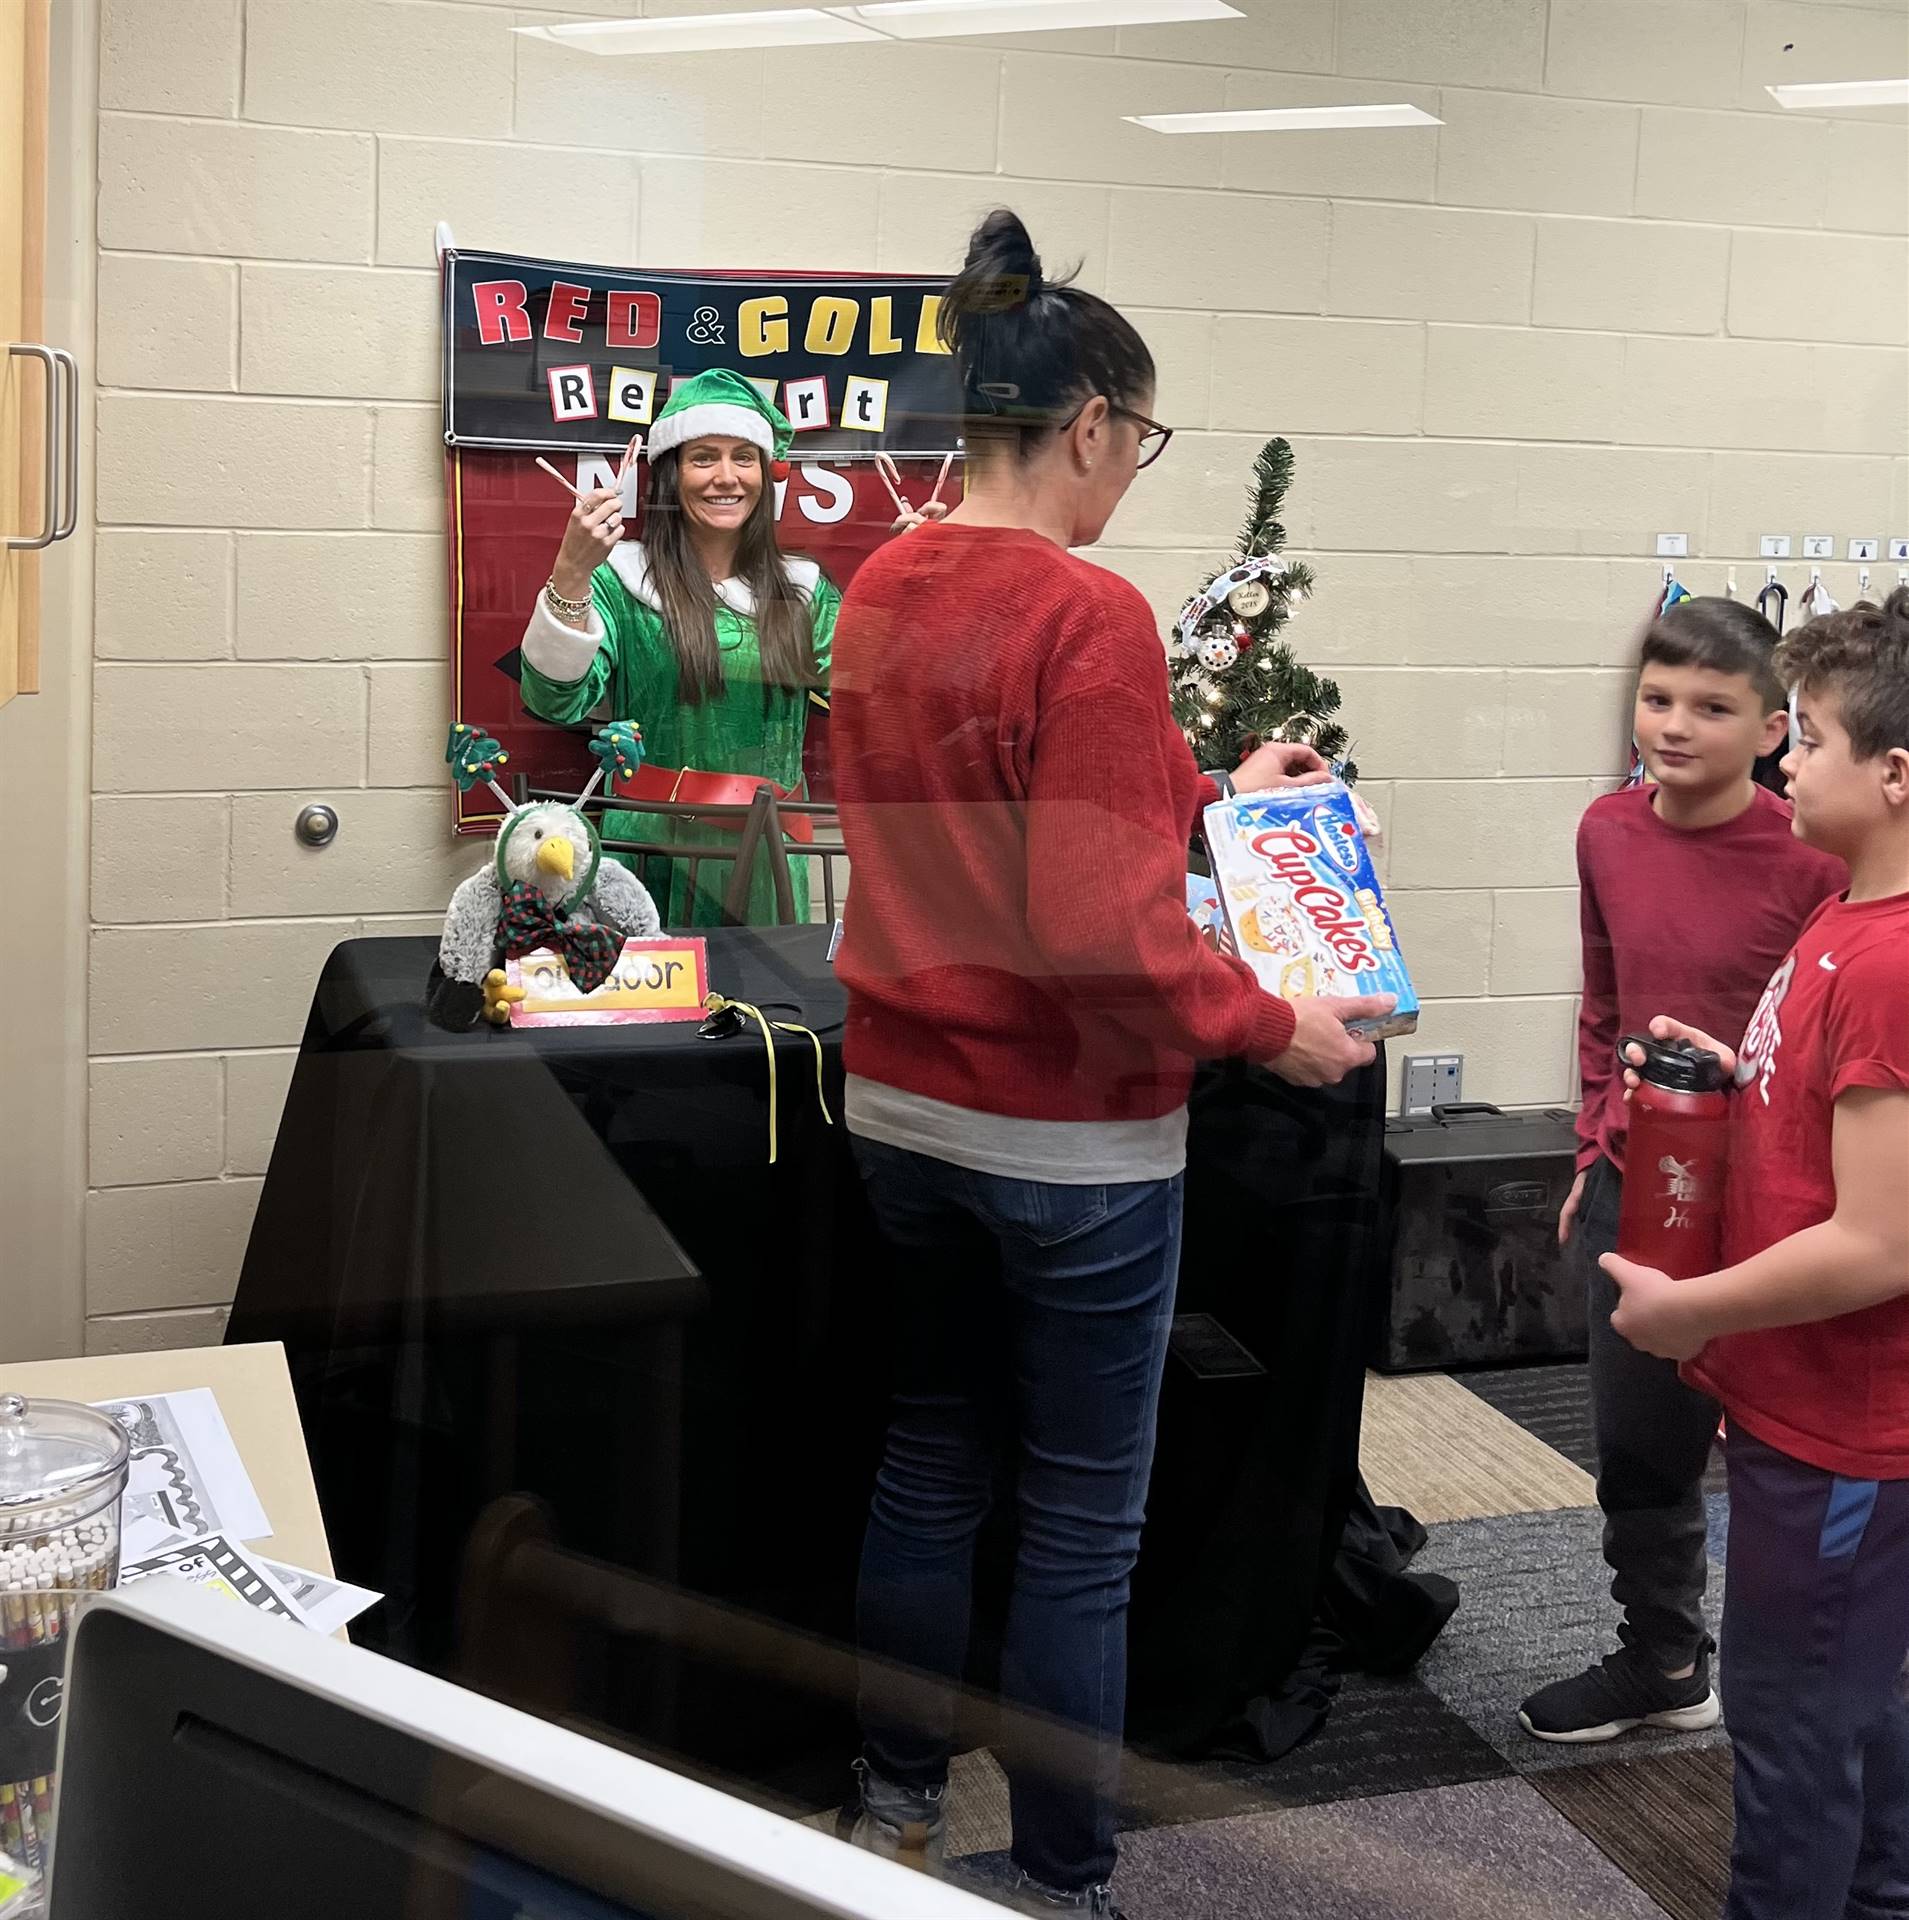 Mrs Crawford dressed as the elf is posed behind the children for the morning announcements